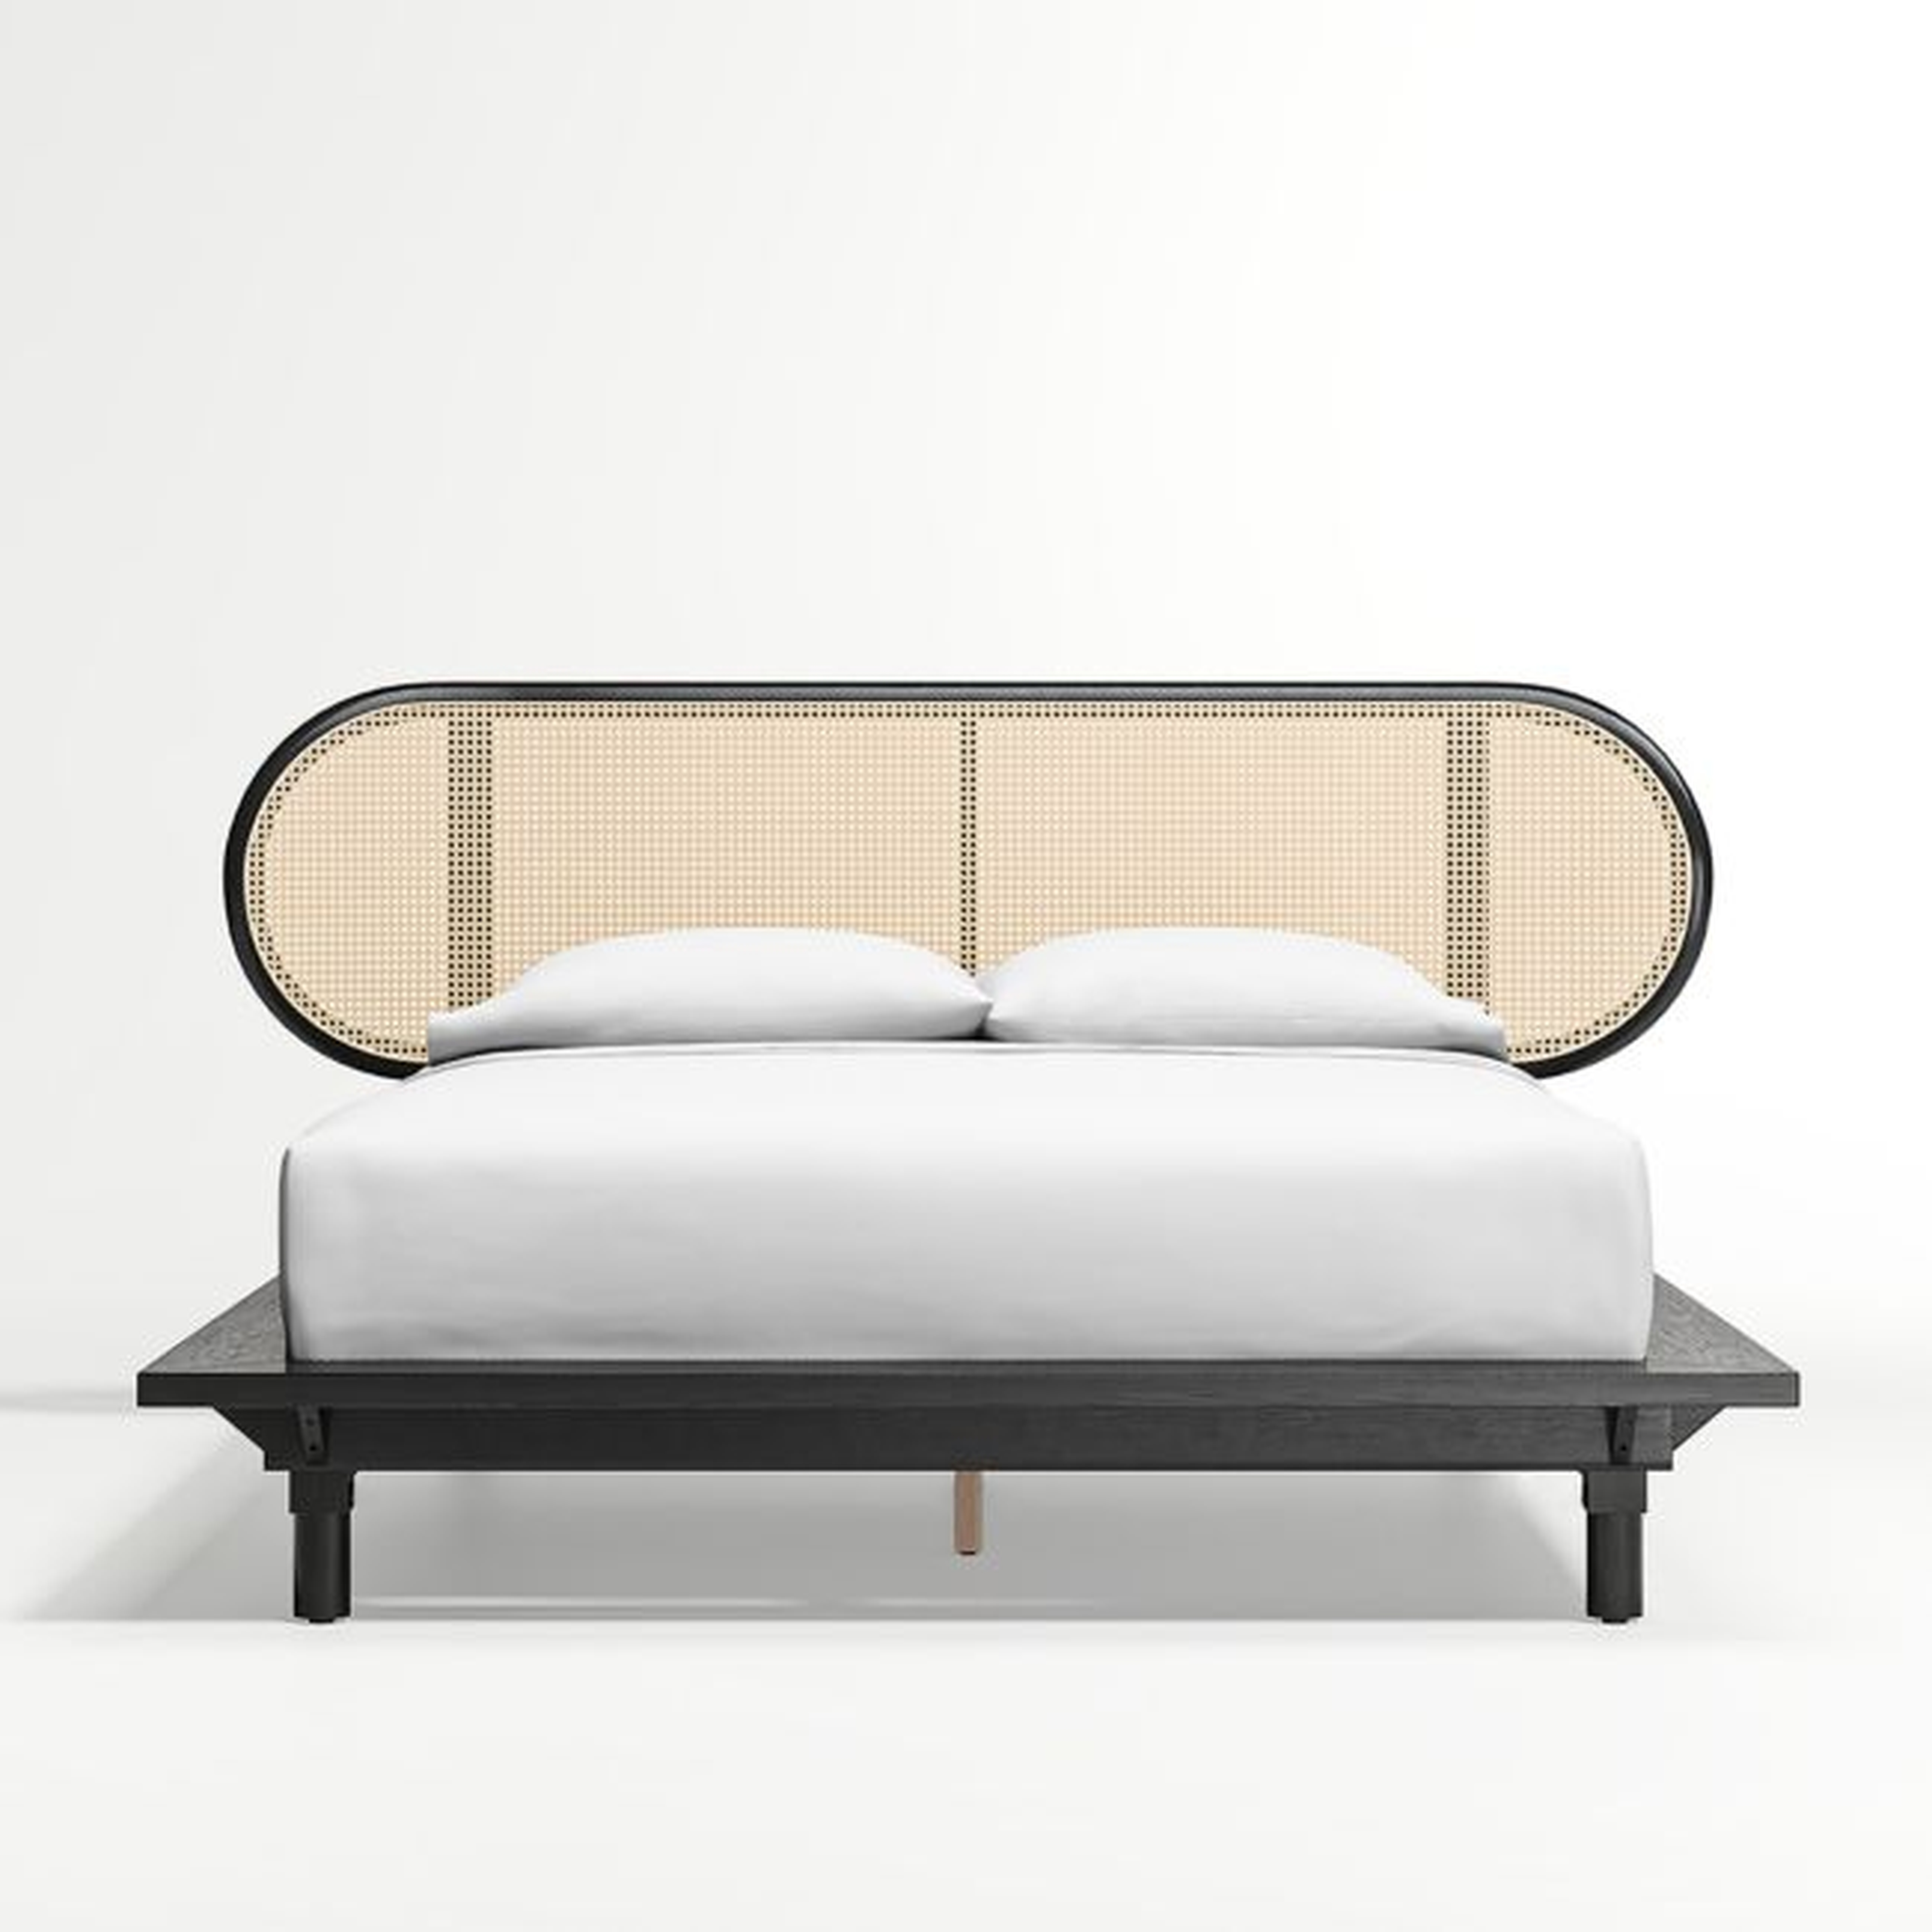 Anaise Cane Bed Frame, Queen - Crate and Barrel